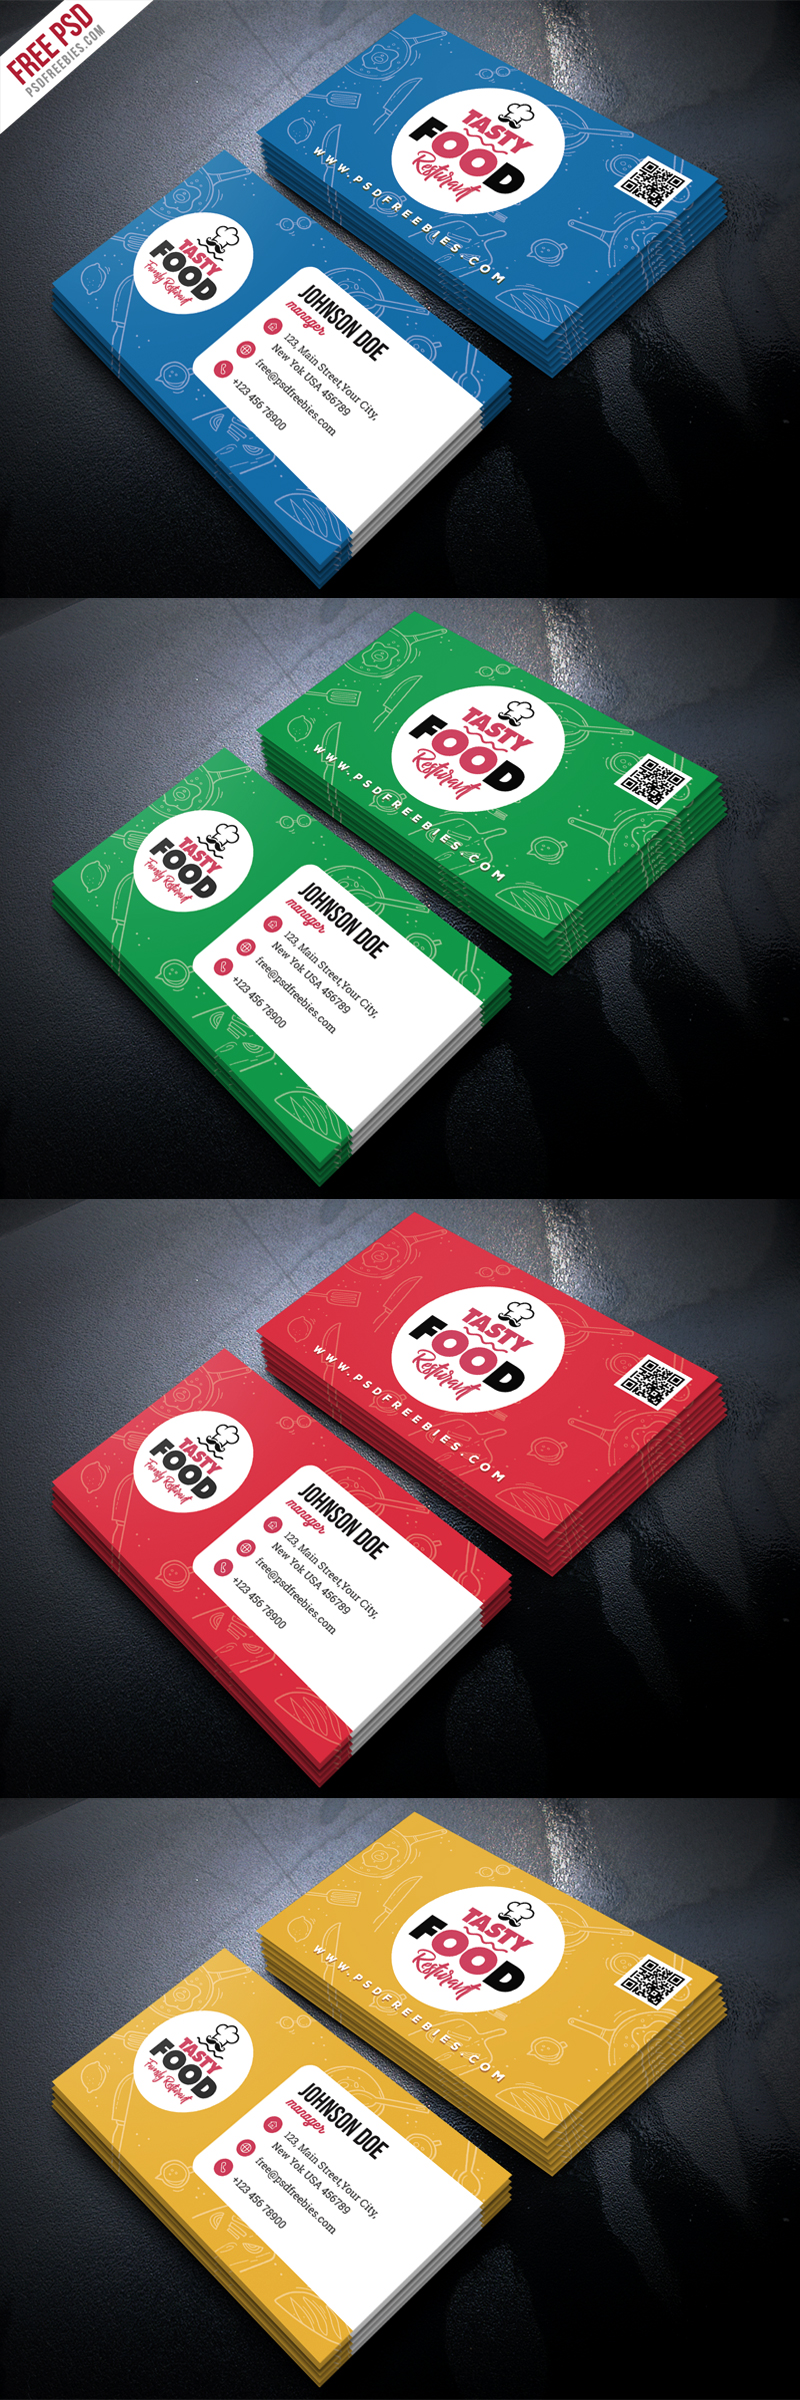 Restaurant Business Card Free PSD Bundle – PSDFreebies.com Throughout Food Business Cards Templates Free